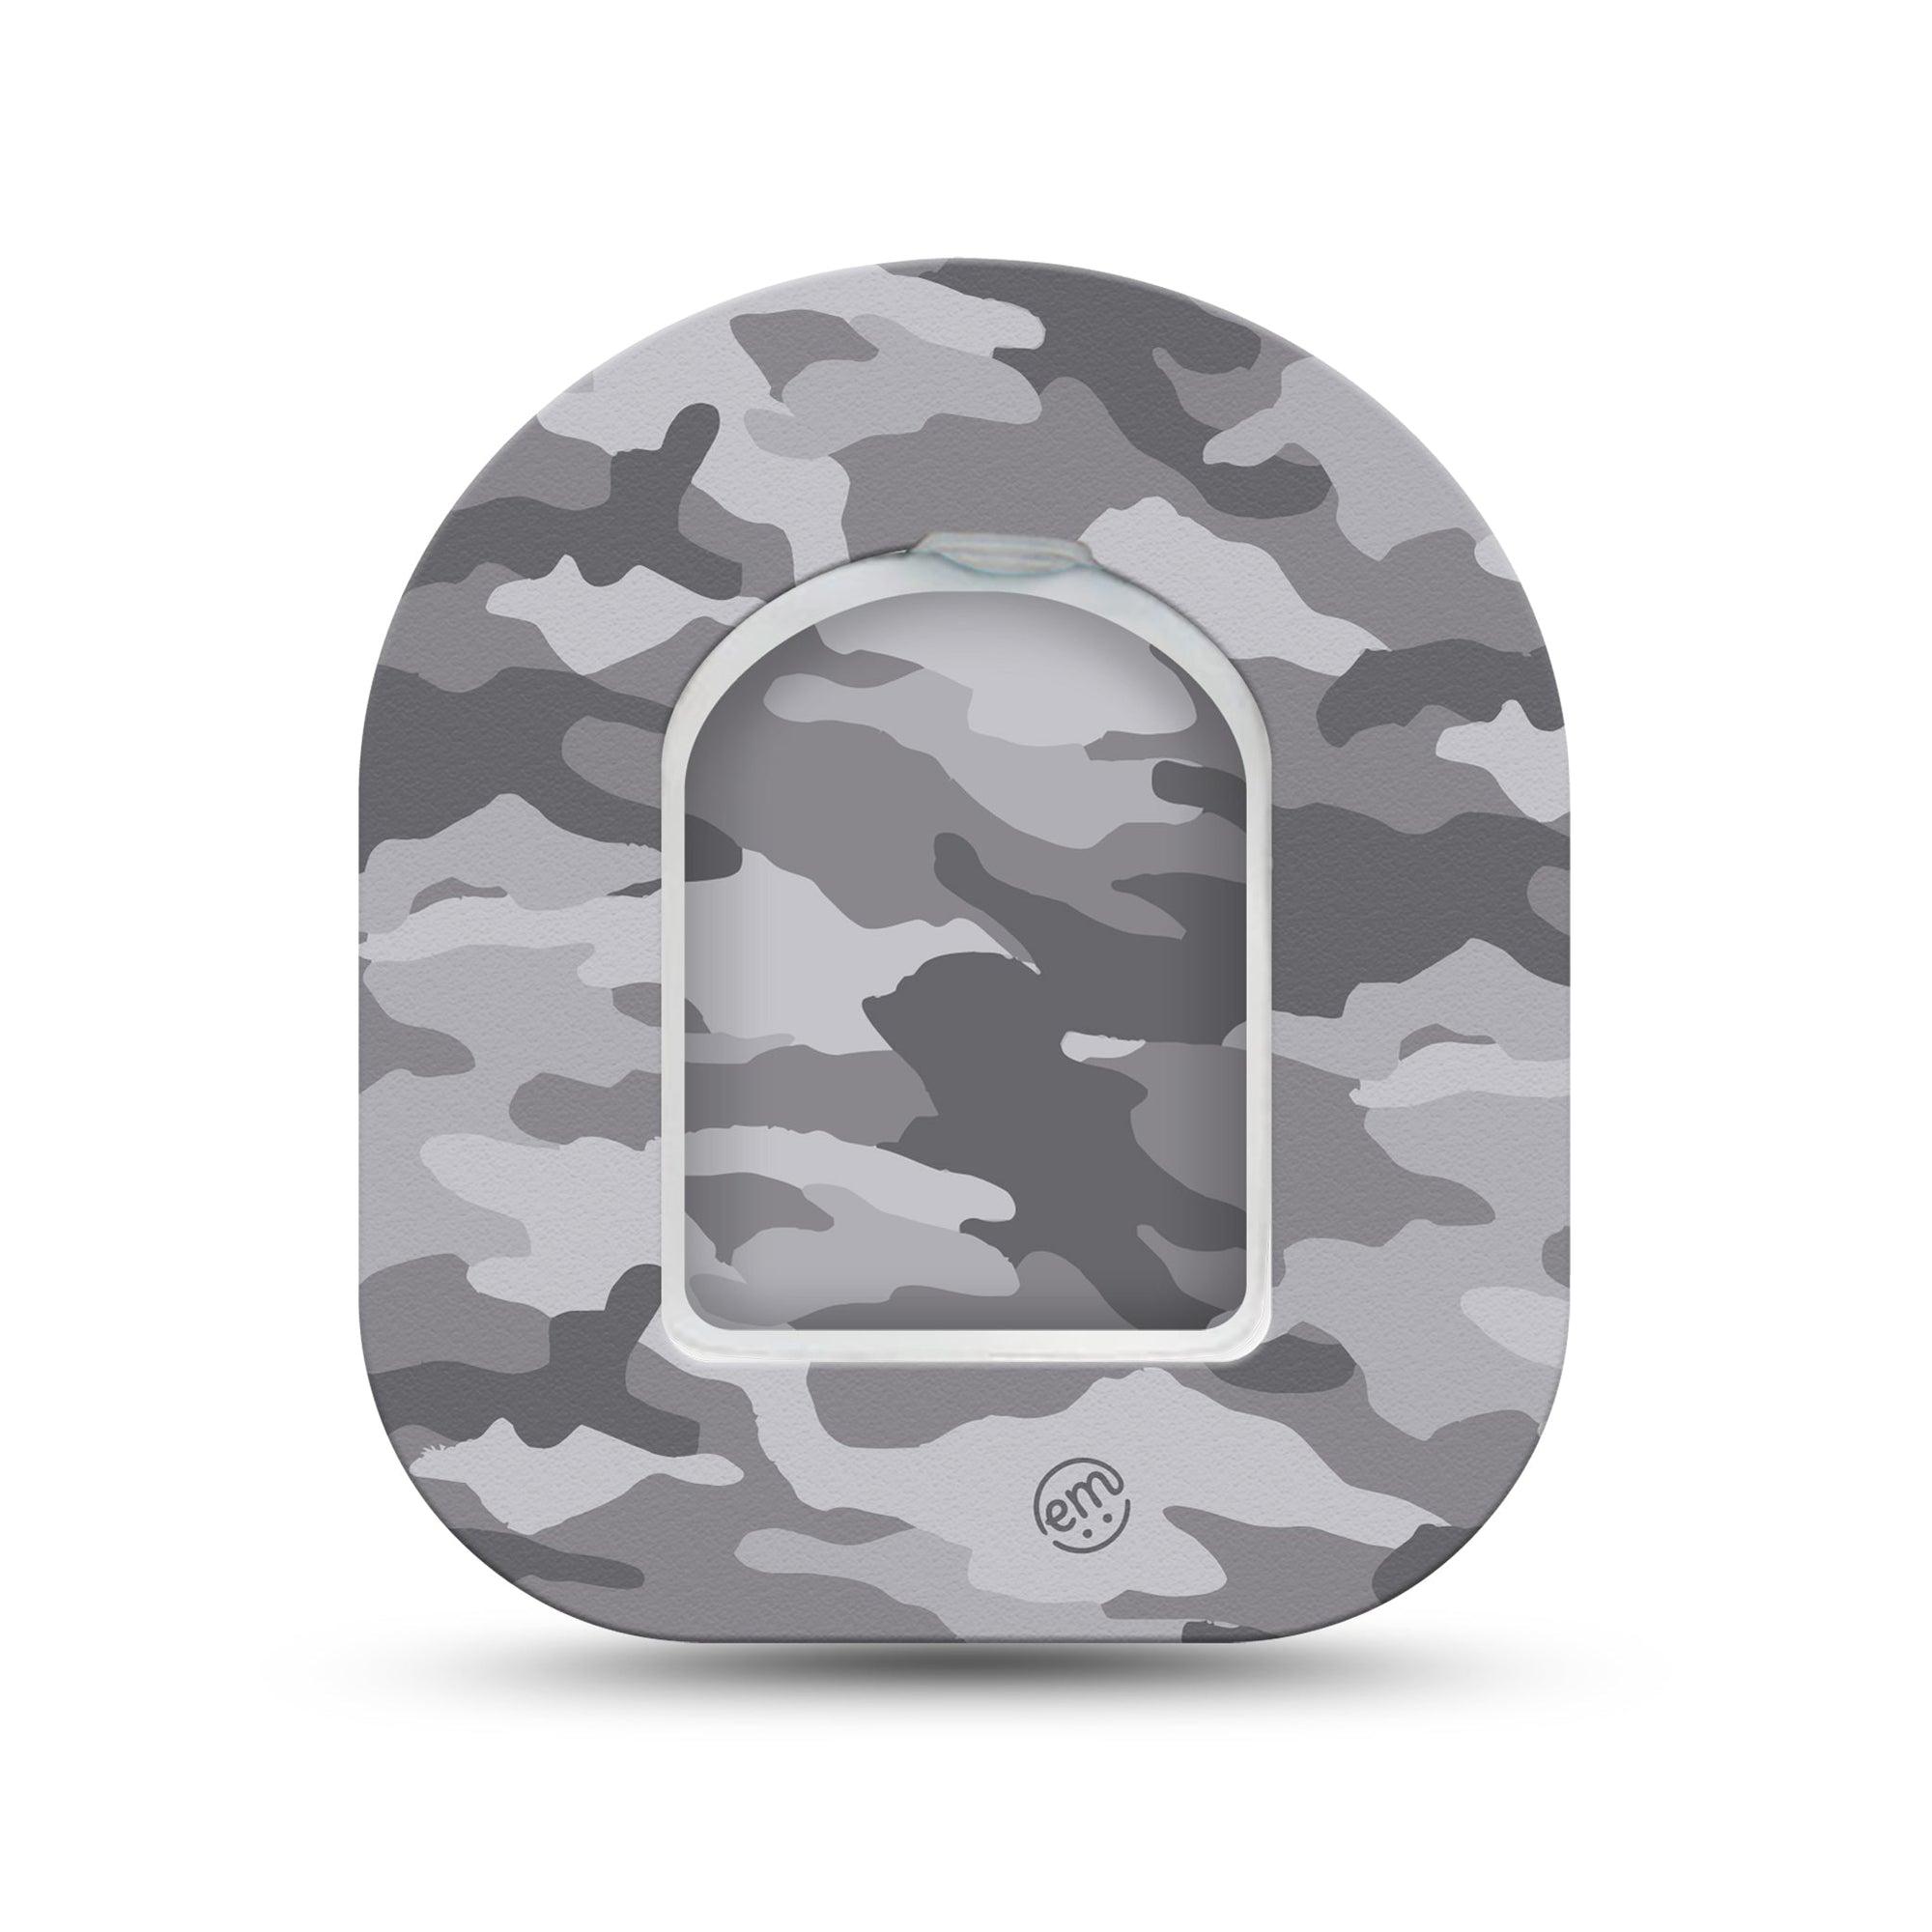 ExpressionMed Gray Camo Omnipod Surface Center Sticker and Mini Tape Blending Color Inspired Vinyl Sticker and Tape Design Pump Design